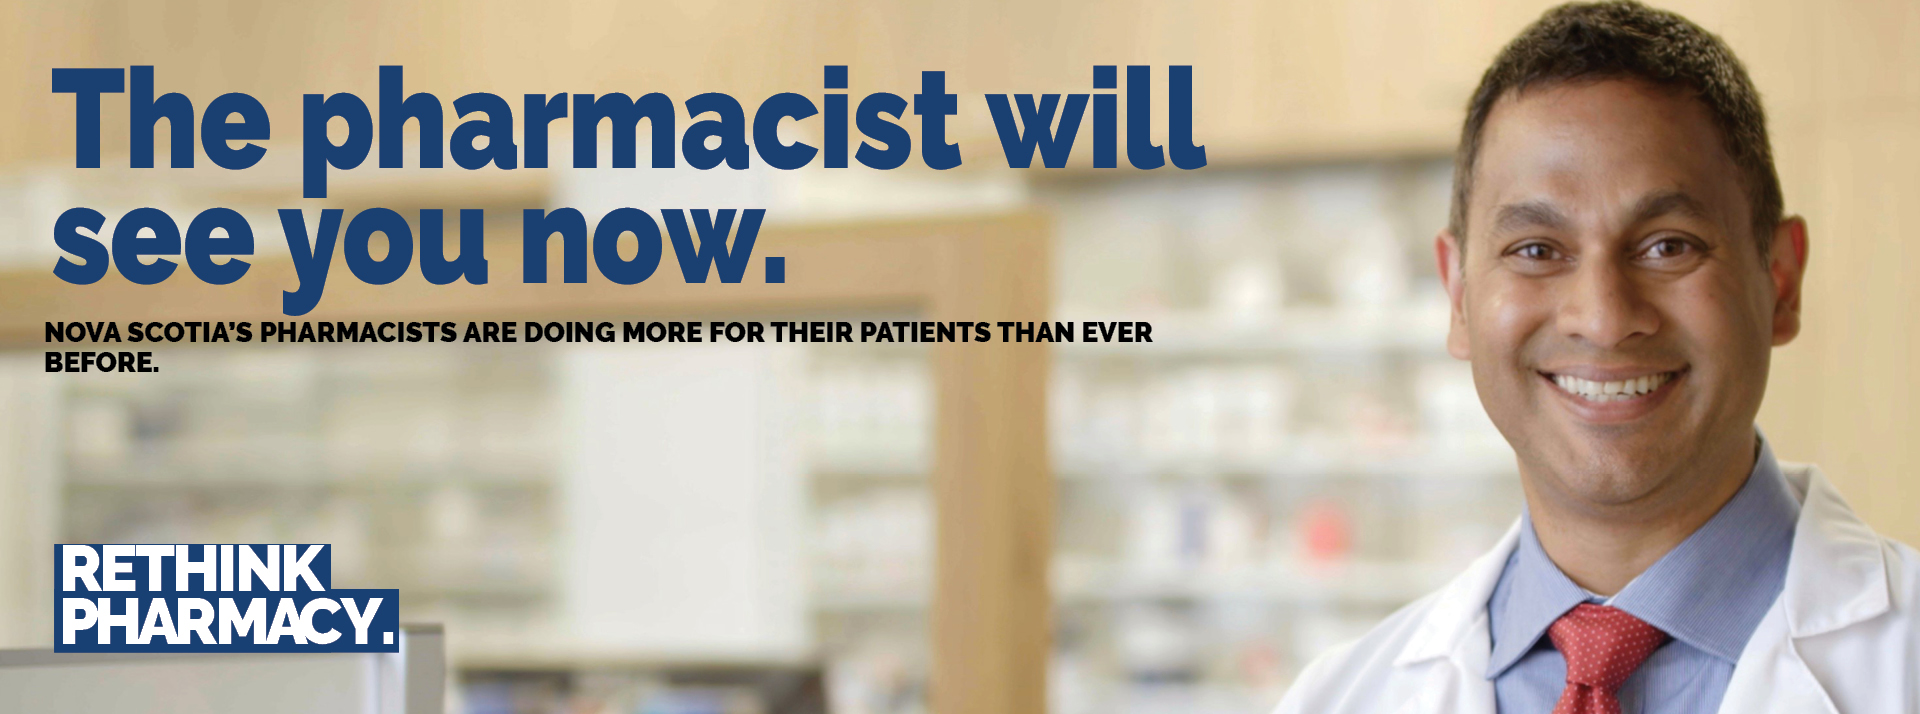 The Pharmacist Will See You Now  Pharmacy Association of Nova Scotia